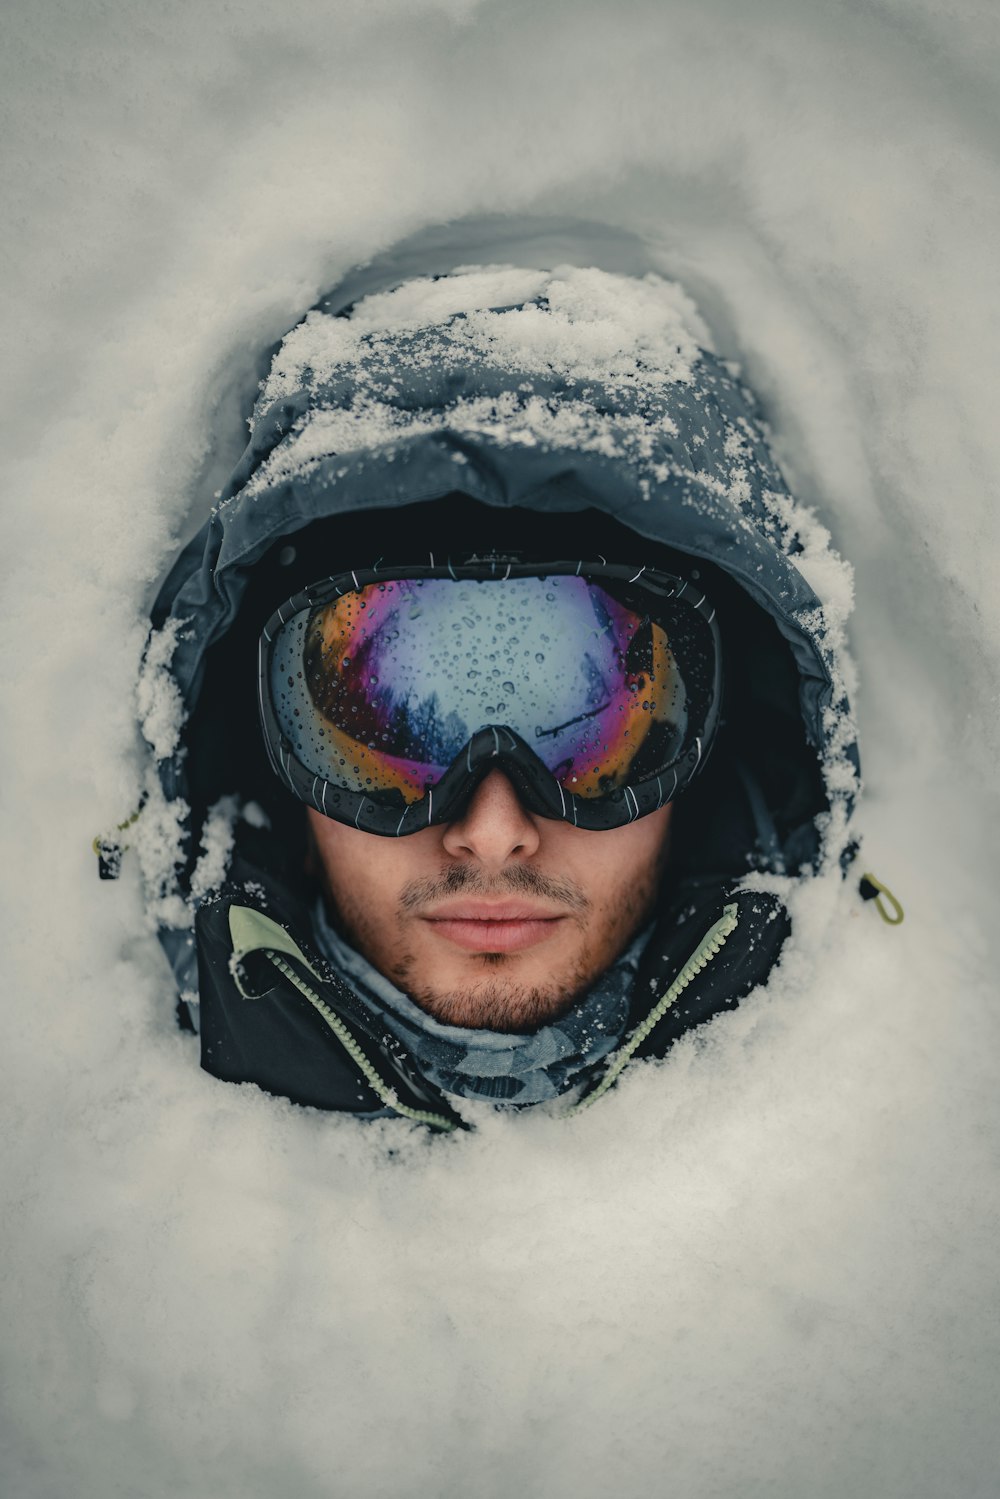 a man wearing ski goggles in the snow